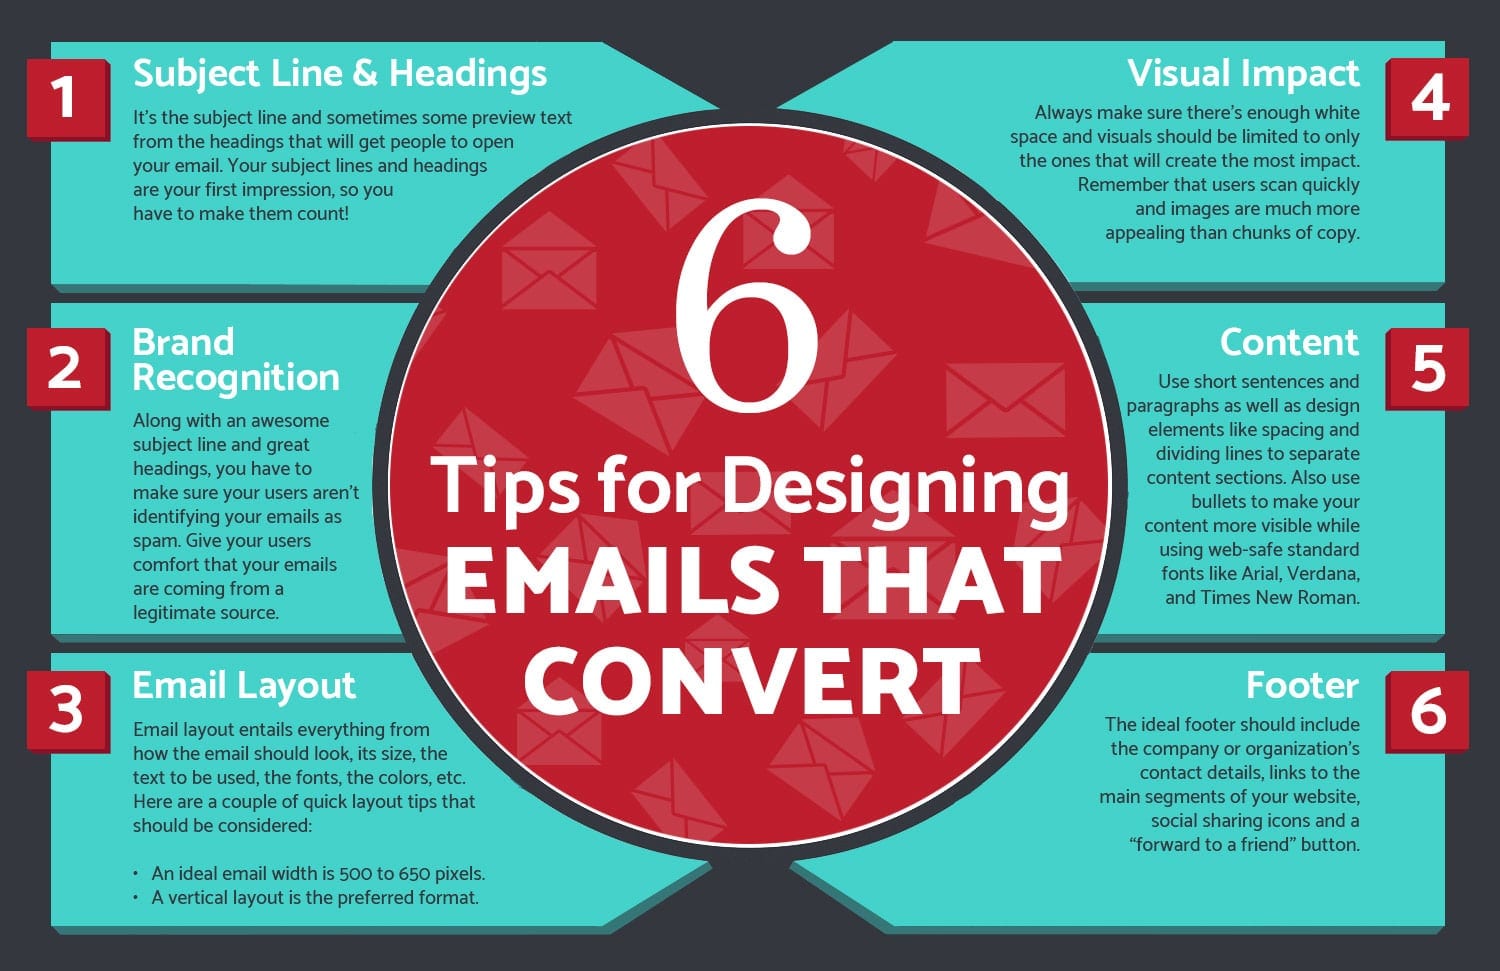 We will discuss designing tips for improving email conversion rate